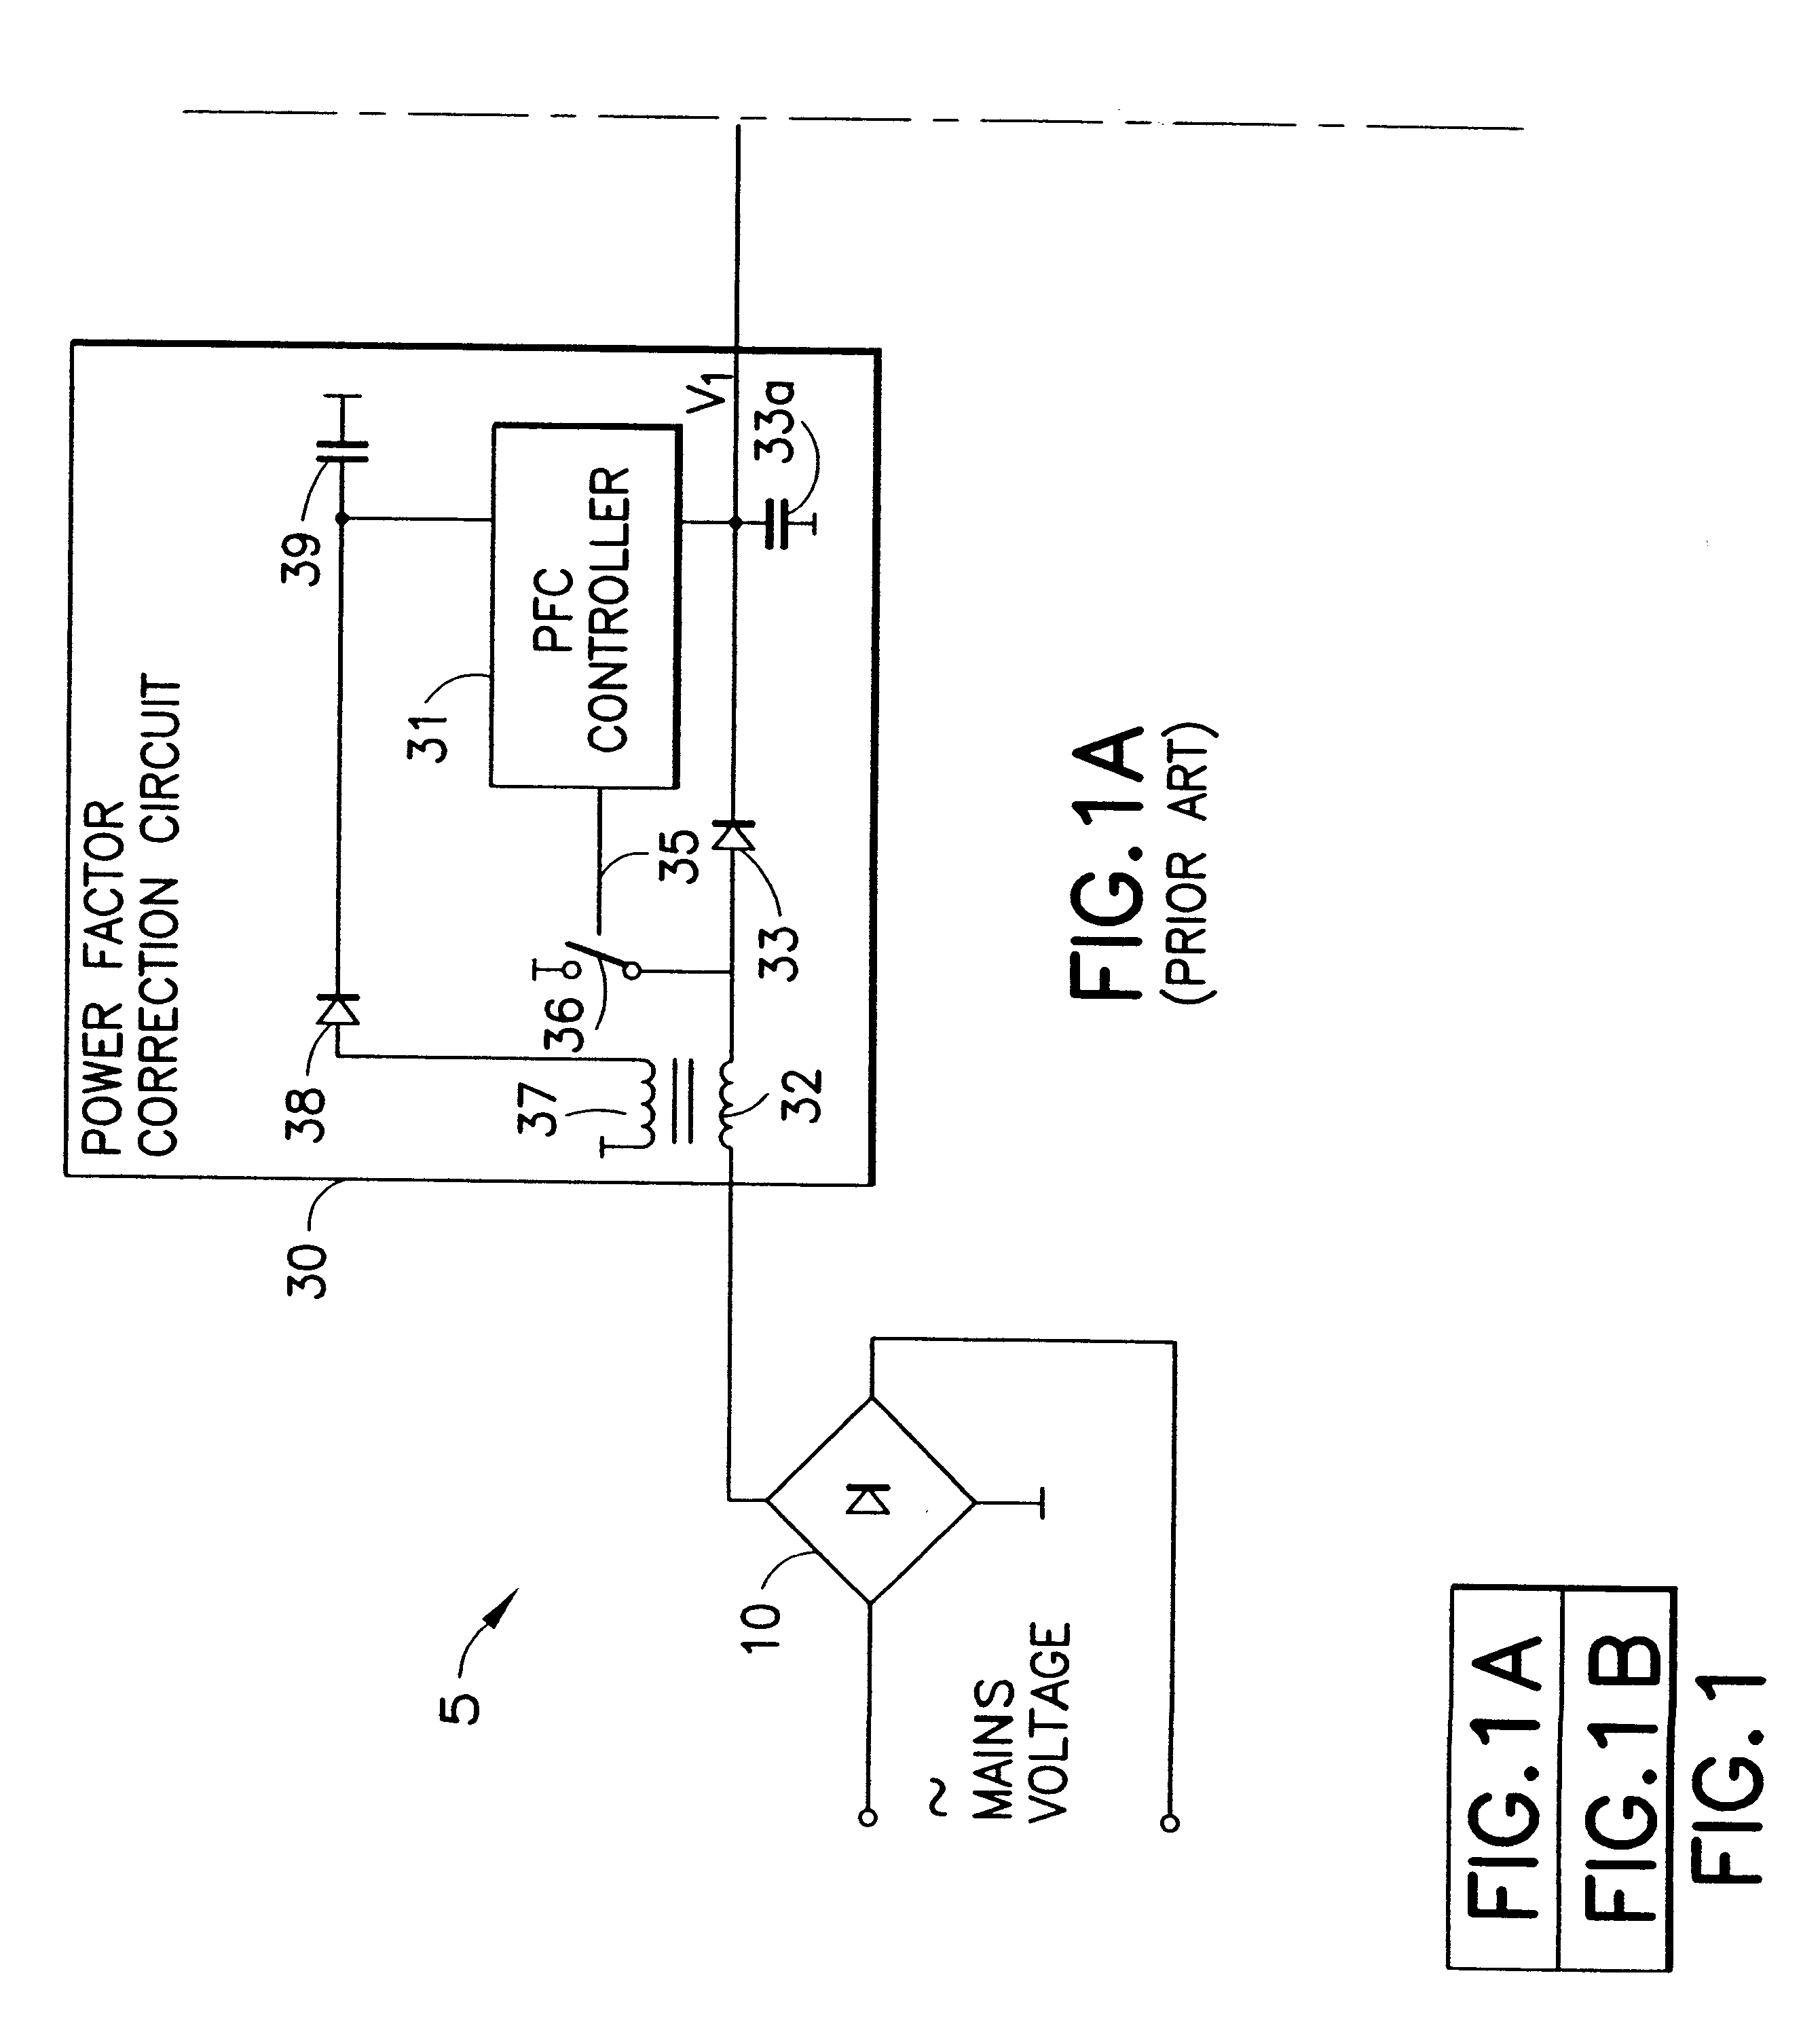 Display monitor power supply circuit featuring secondary side microcontroller for controlling a primary side power factor correction circuit